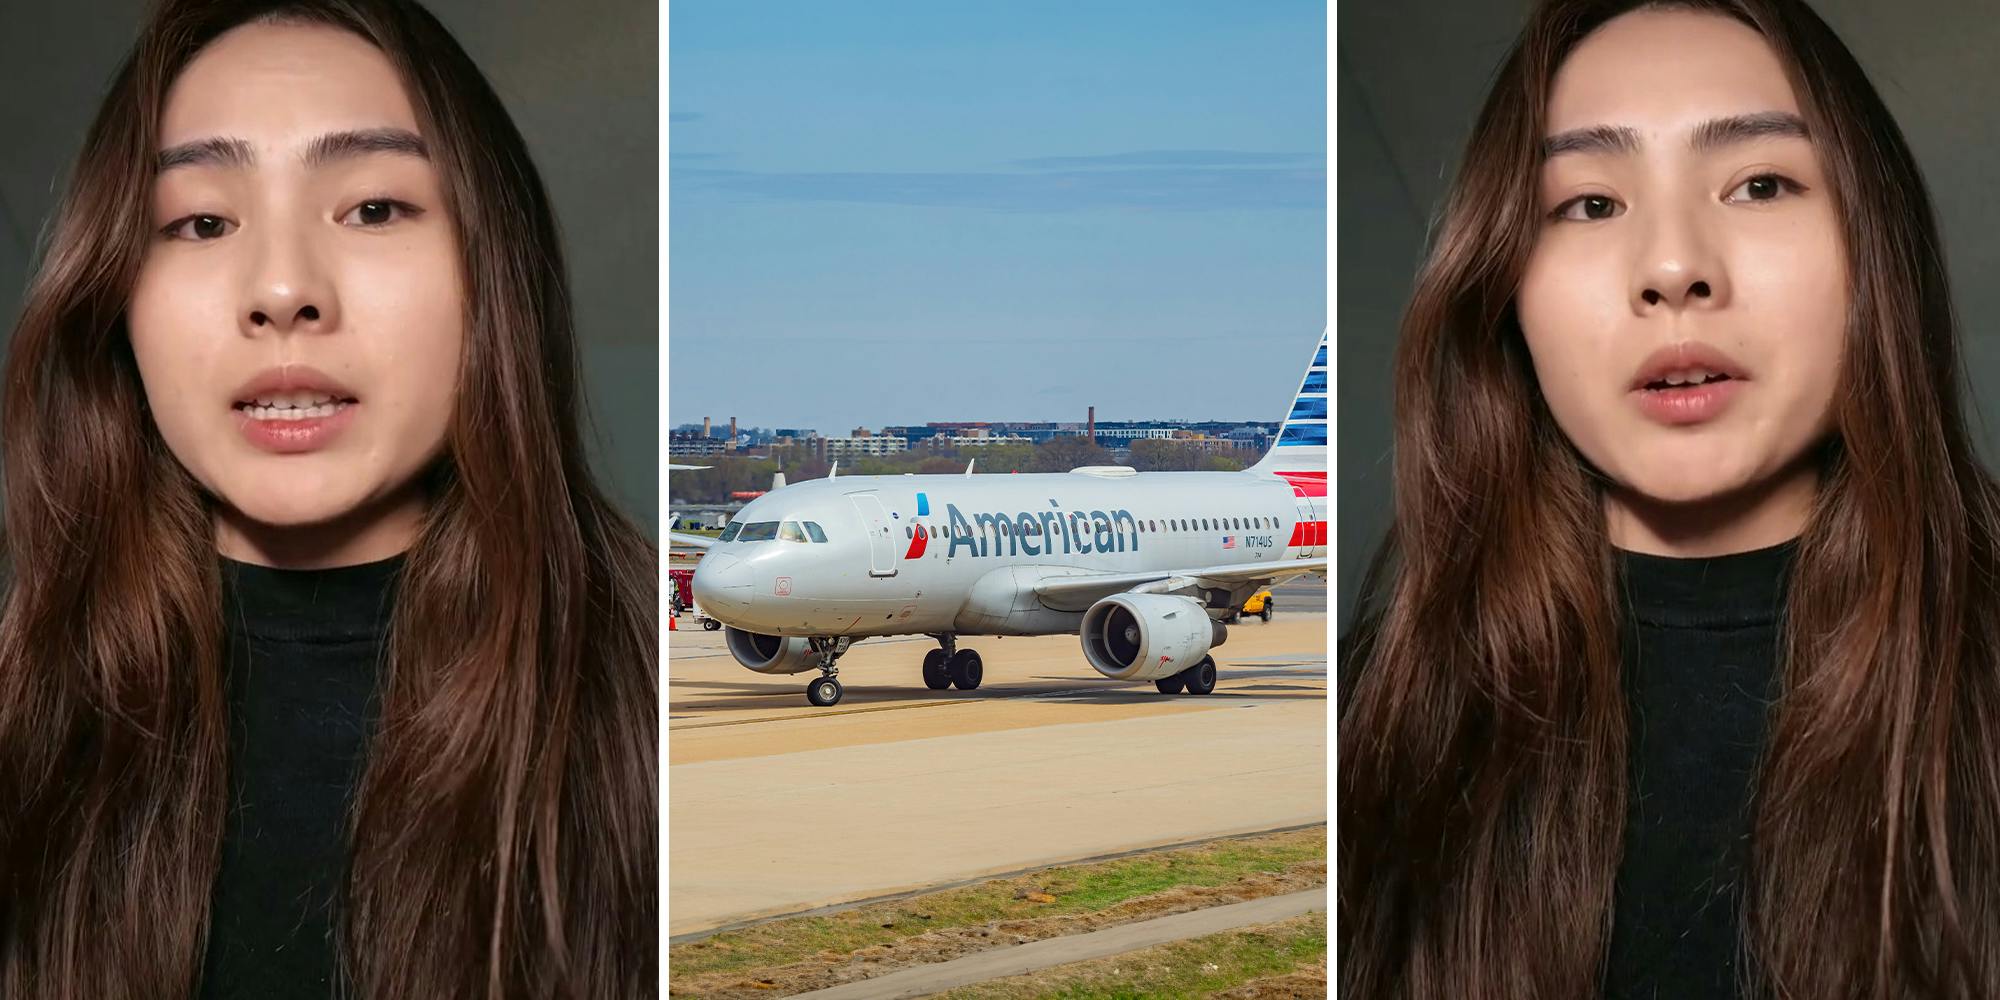 ‘Why should they have to pay for 2 seats?’: Woman calls out American Airlines over policy for plus-size passengers after being sat on